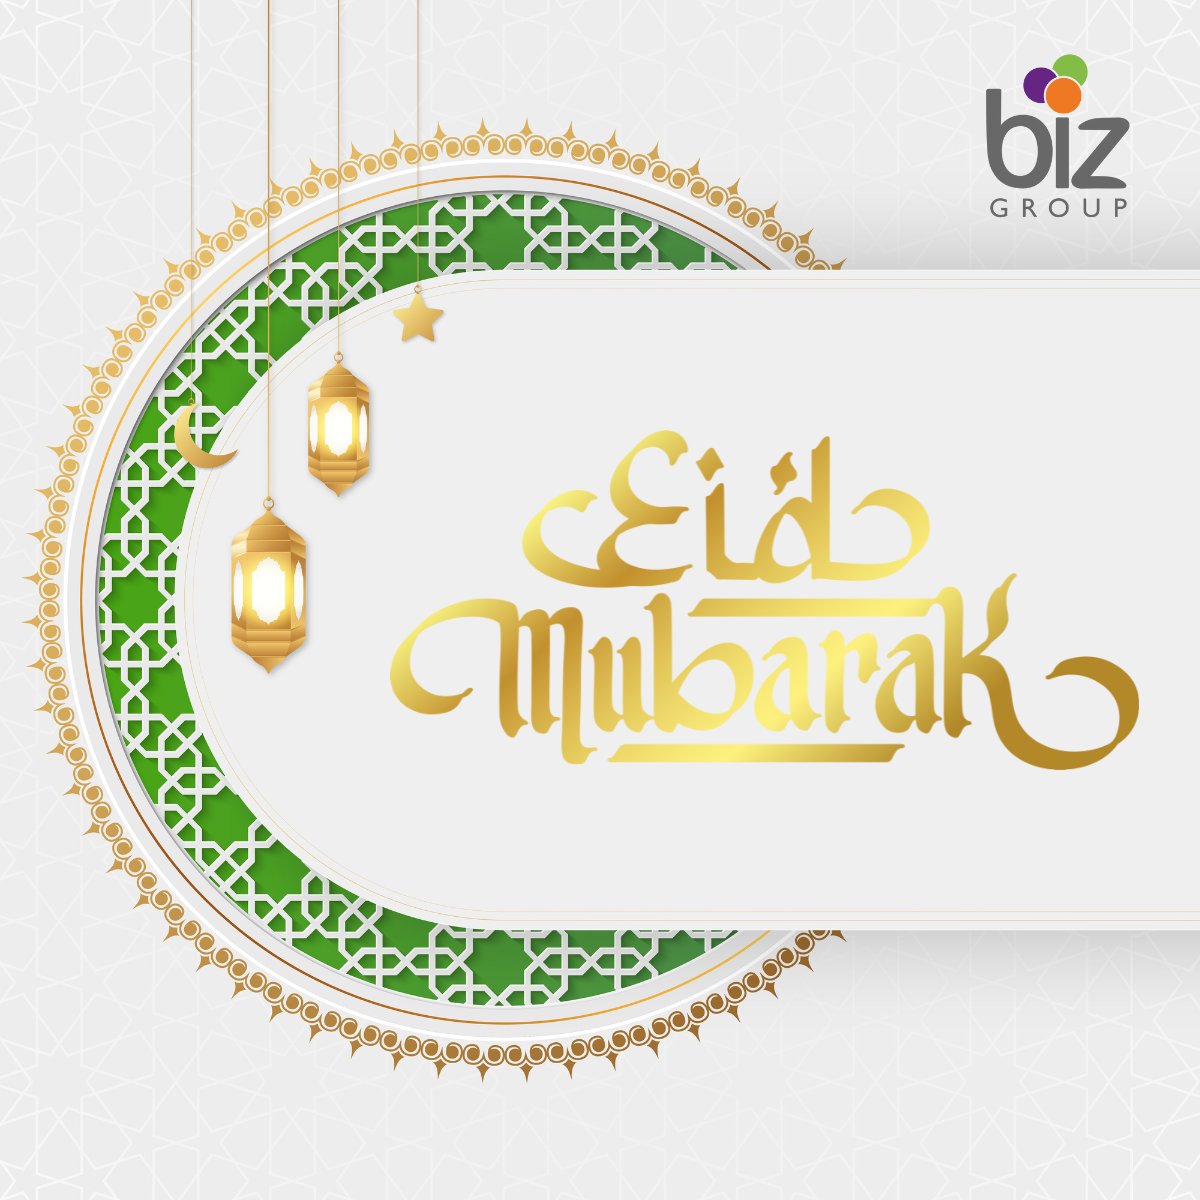 May this Eid bring you peace, happiness, and countless blessings. Wishing you and your loved ones a joyous celebration from Biz Group!

#EidMubarak #BizGroup